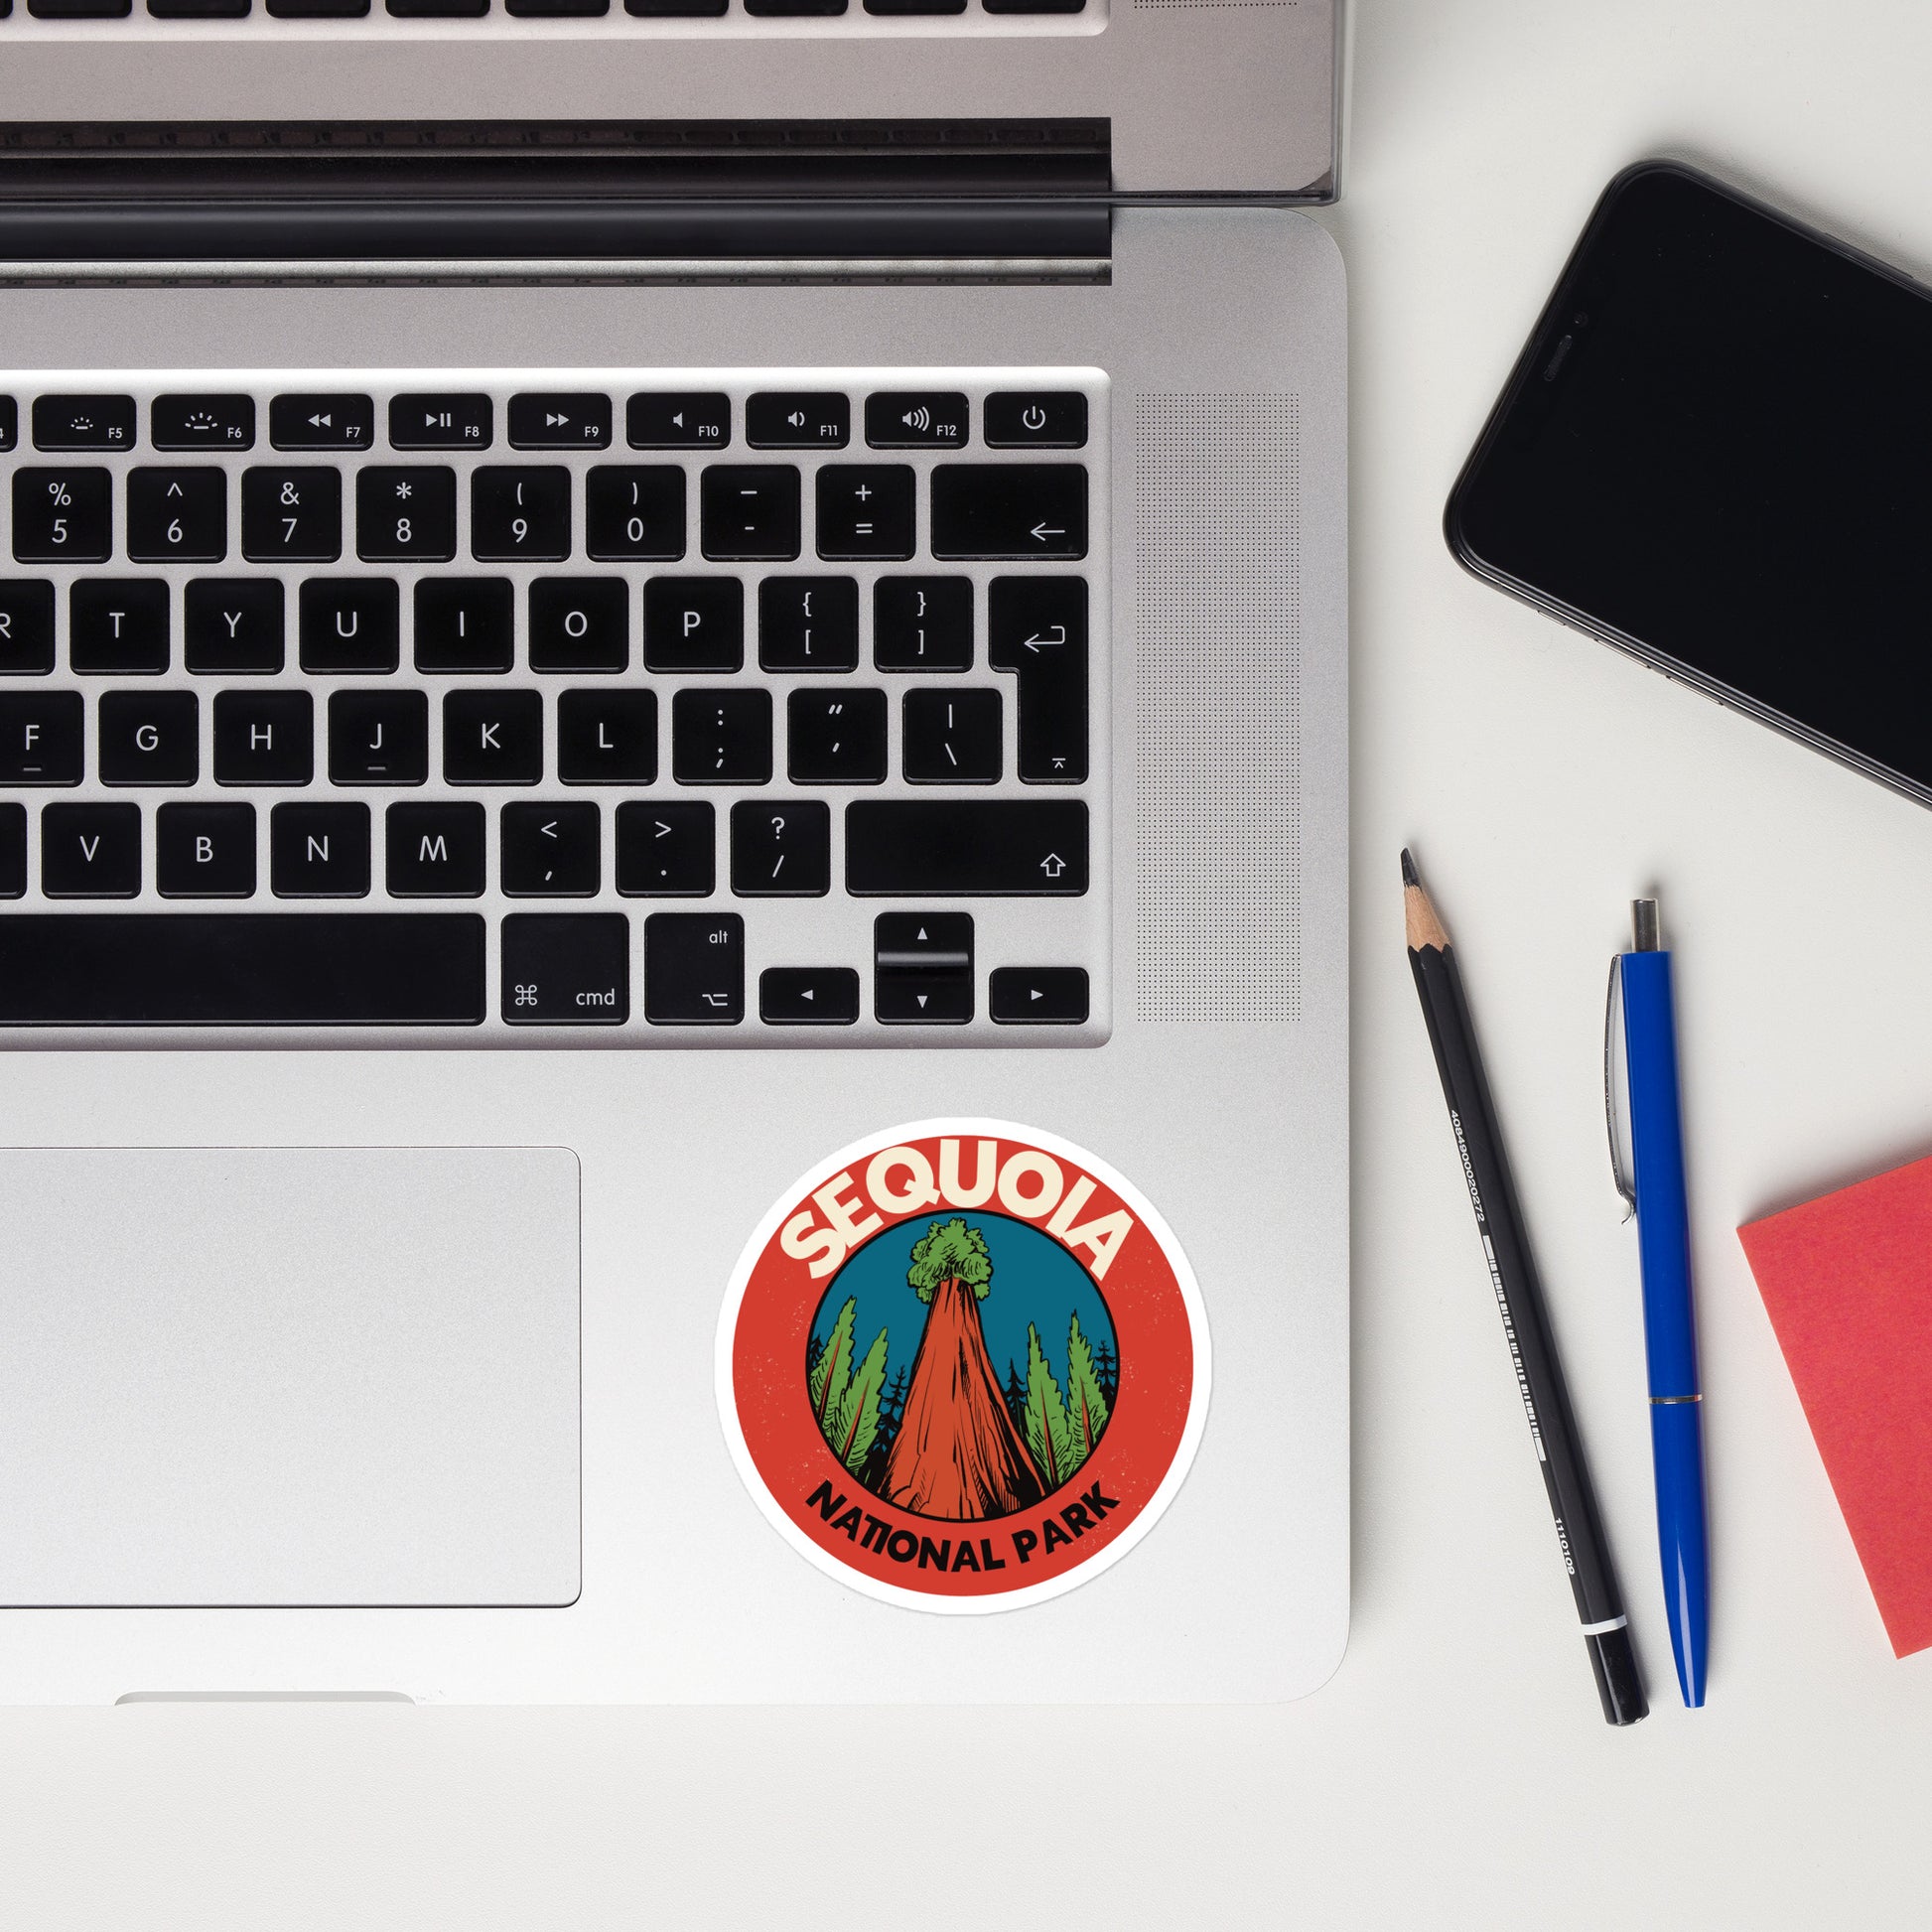 A sticker of Sequoia National Park on a laptop